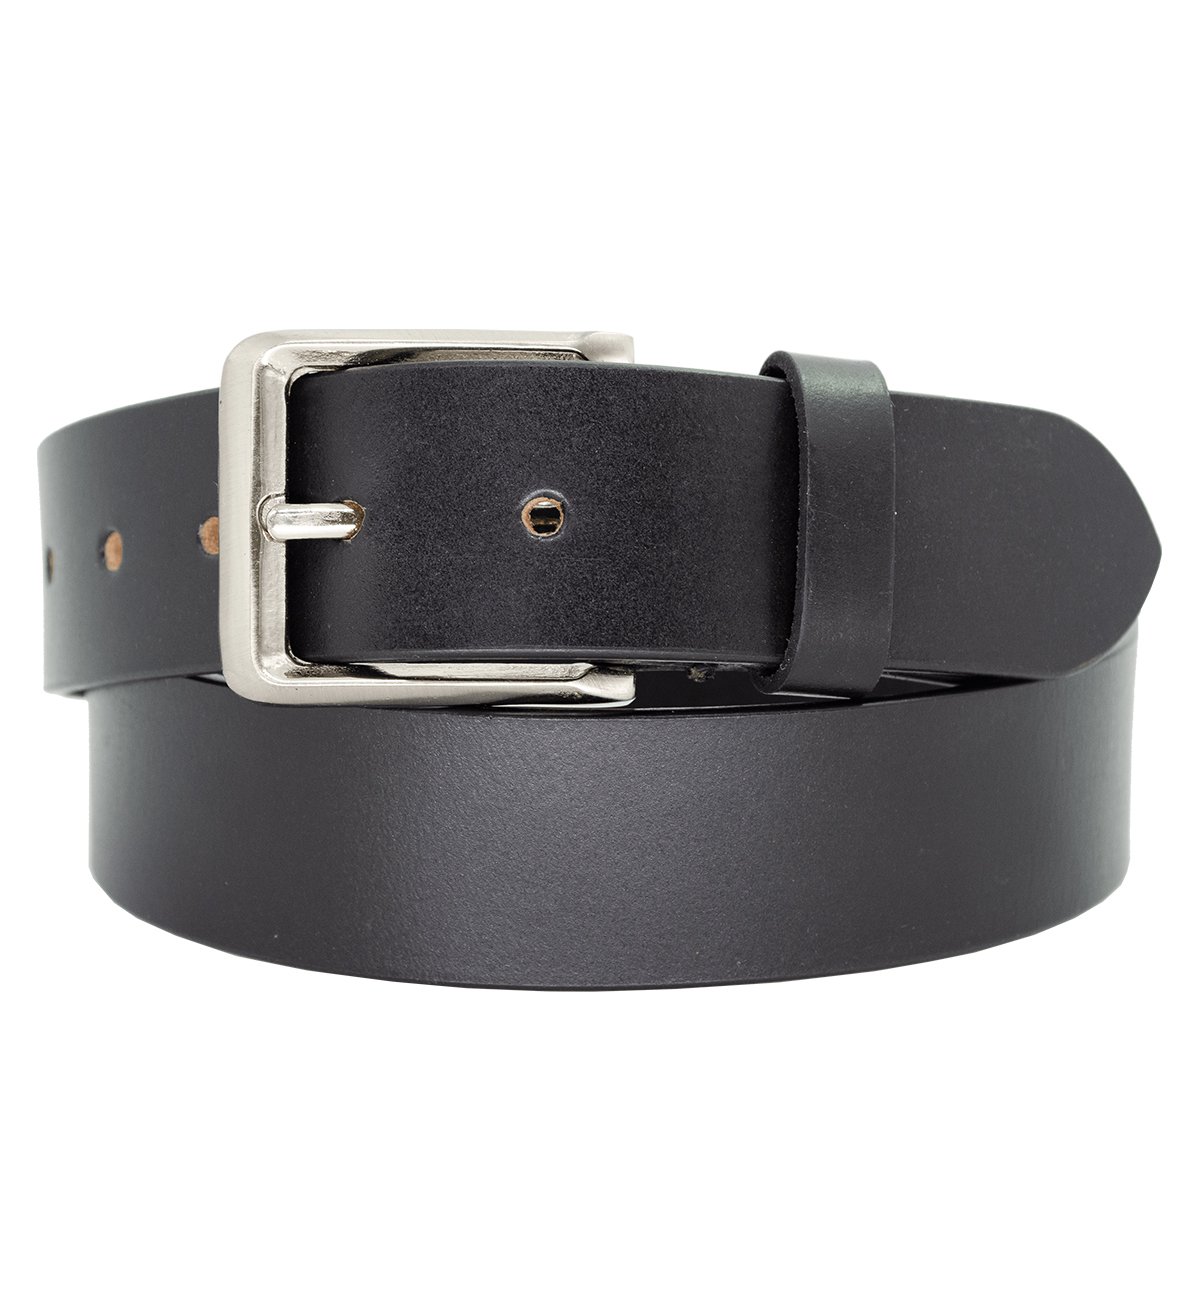 Men's Genuine Leather Belt with Heavy Silver Buckle - #BT-1612